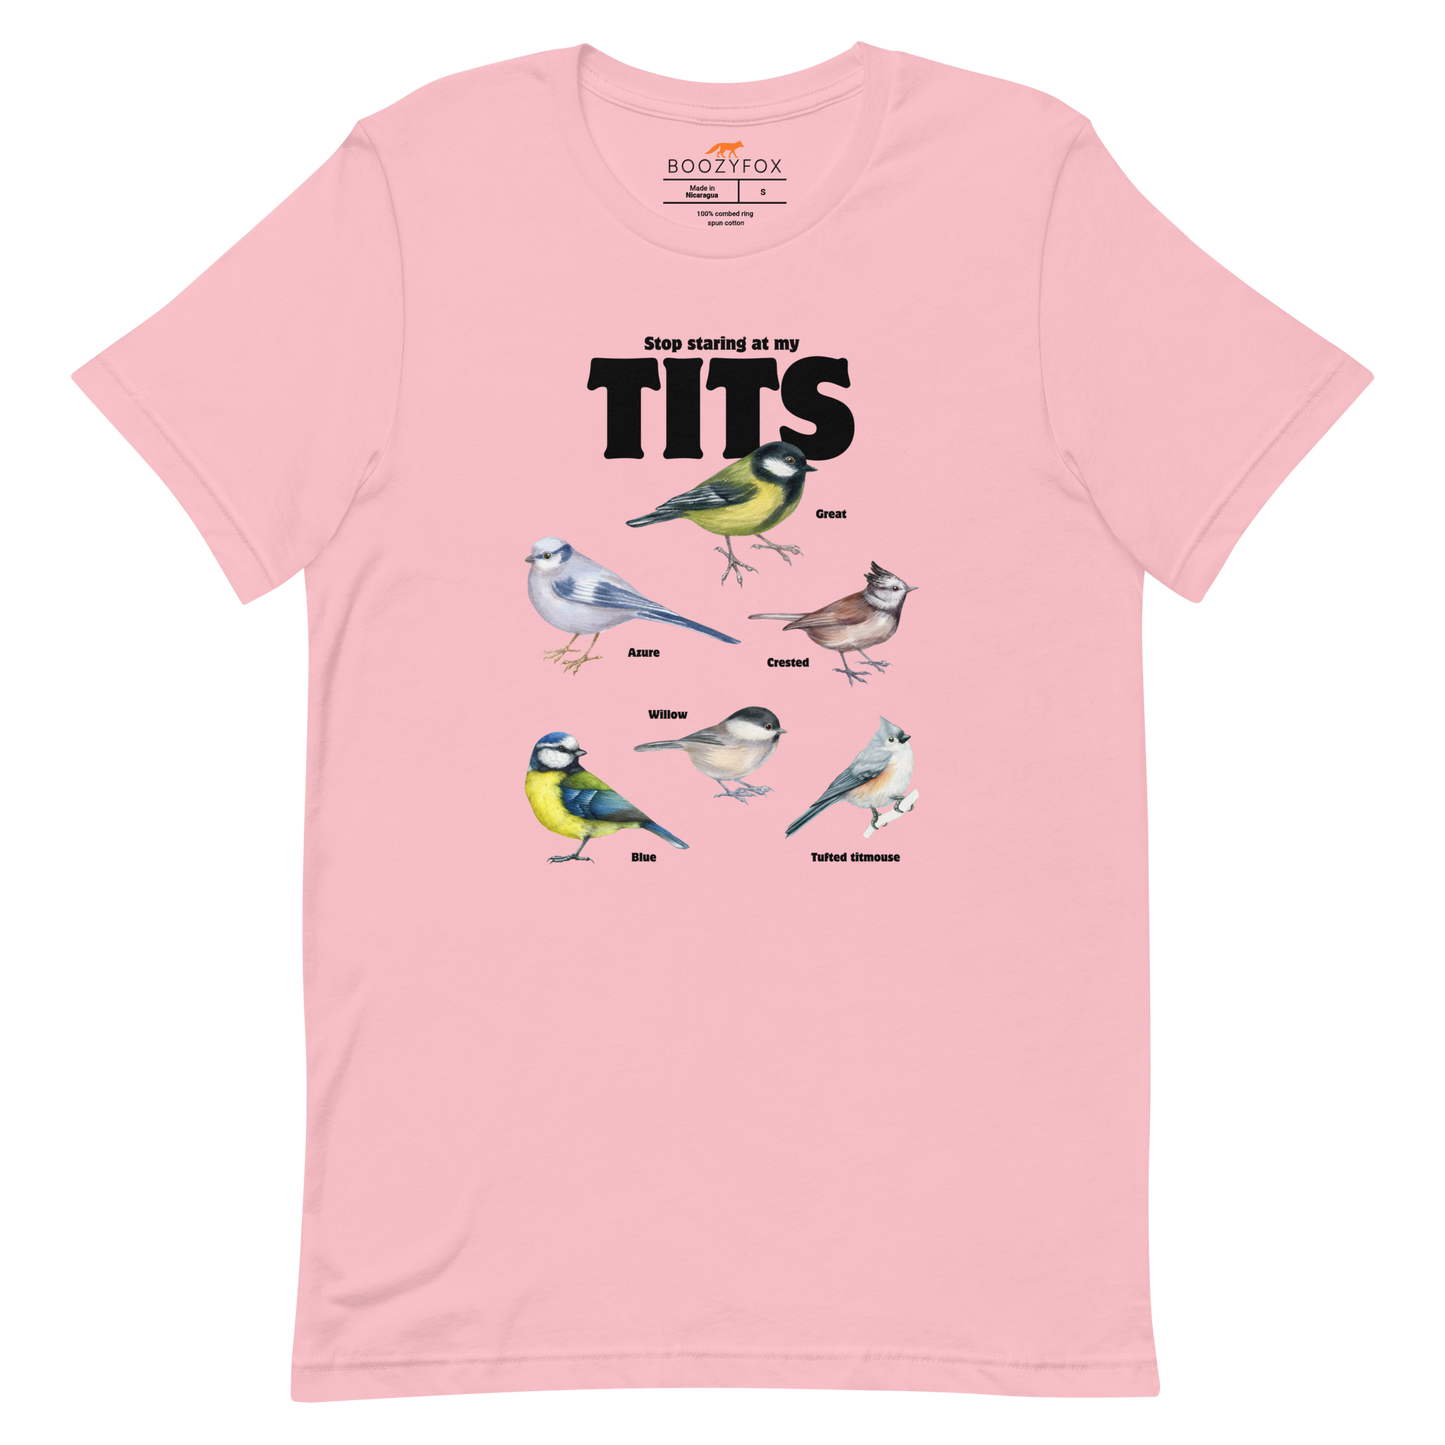 Pink Premium Tit Tee featuring a funny Stop Staring At My Tits graphic on the chest - Funny Graphic Tit Bird Tees - Boozy Fox